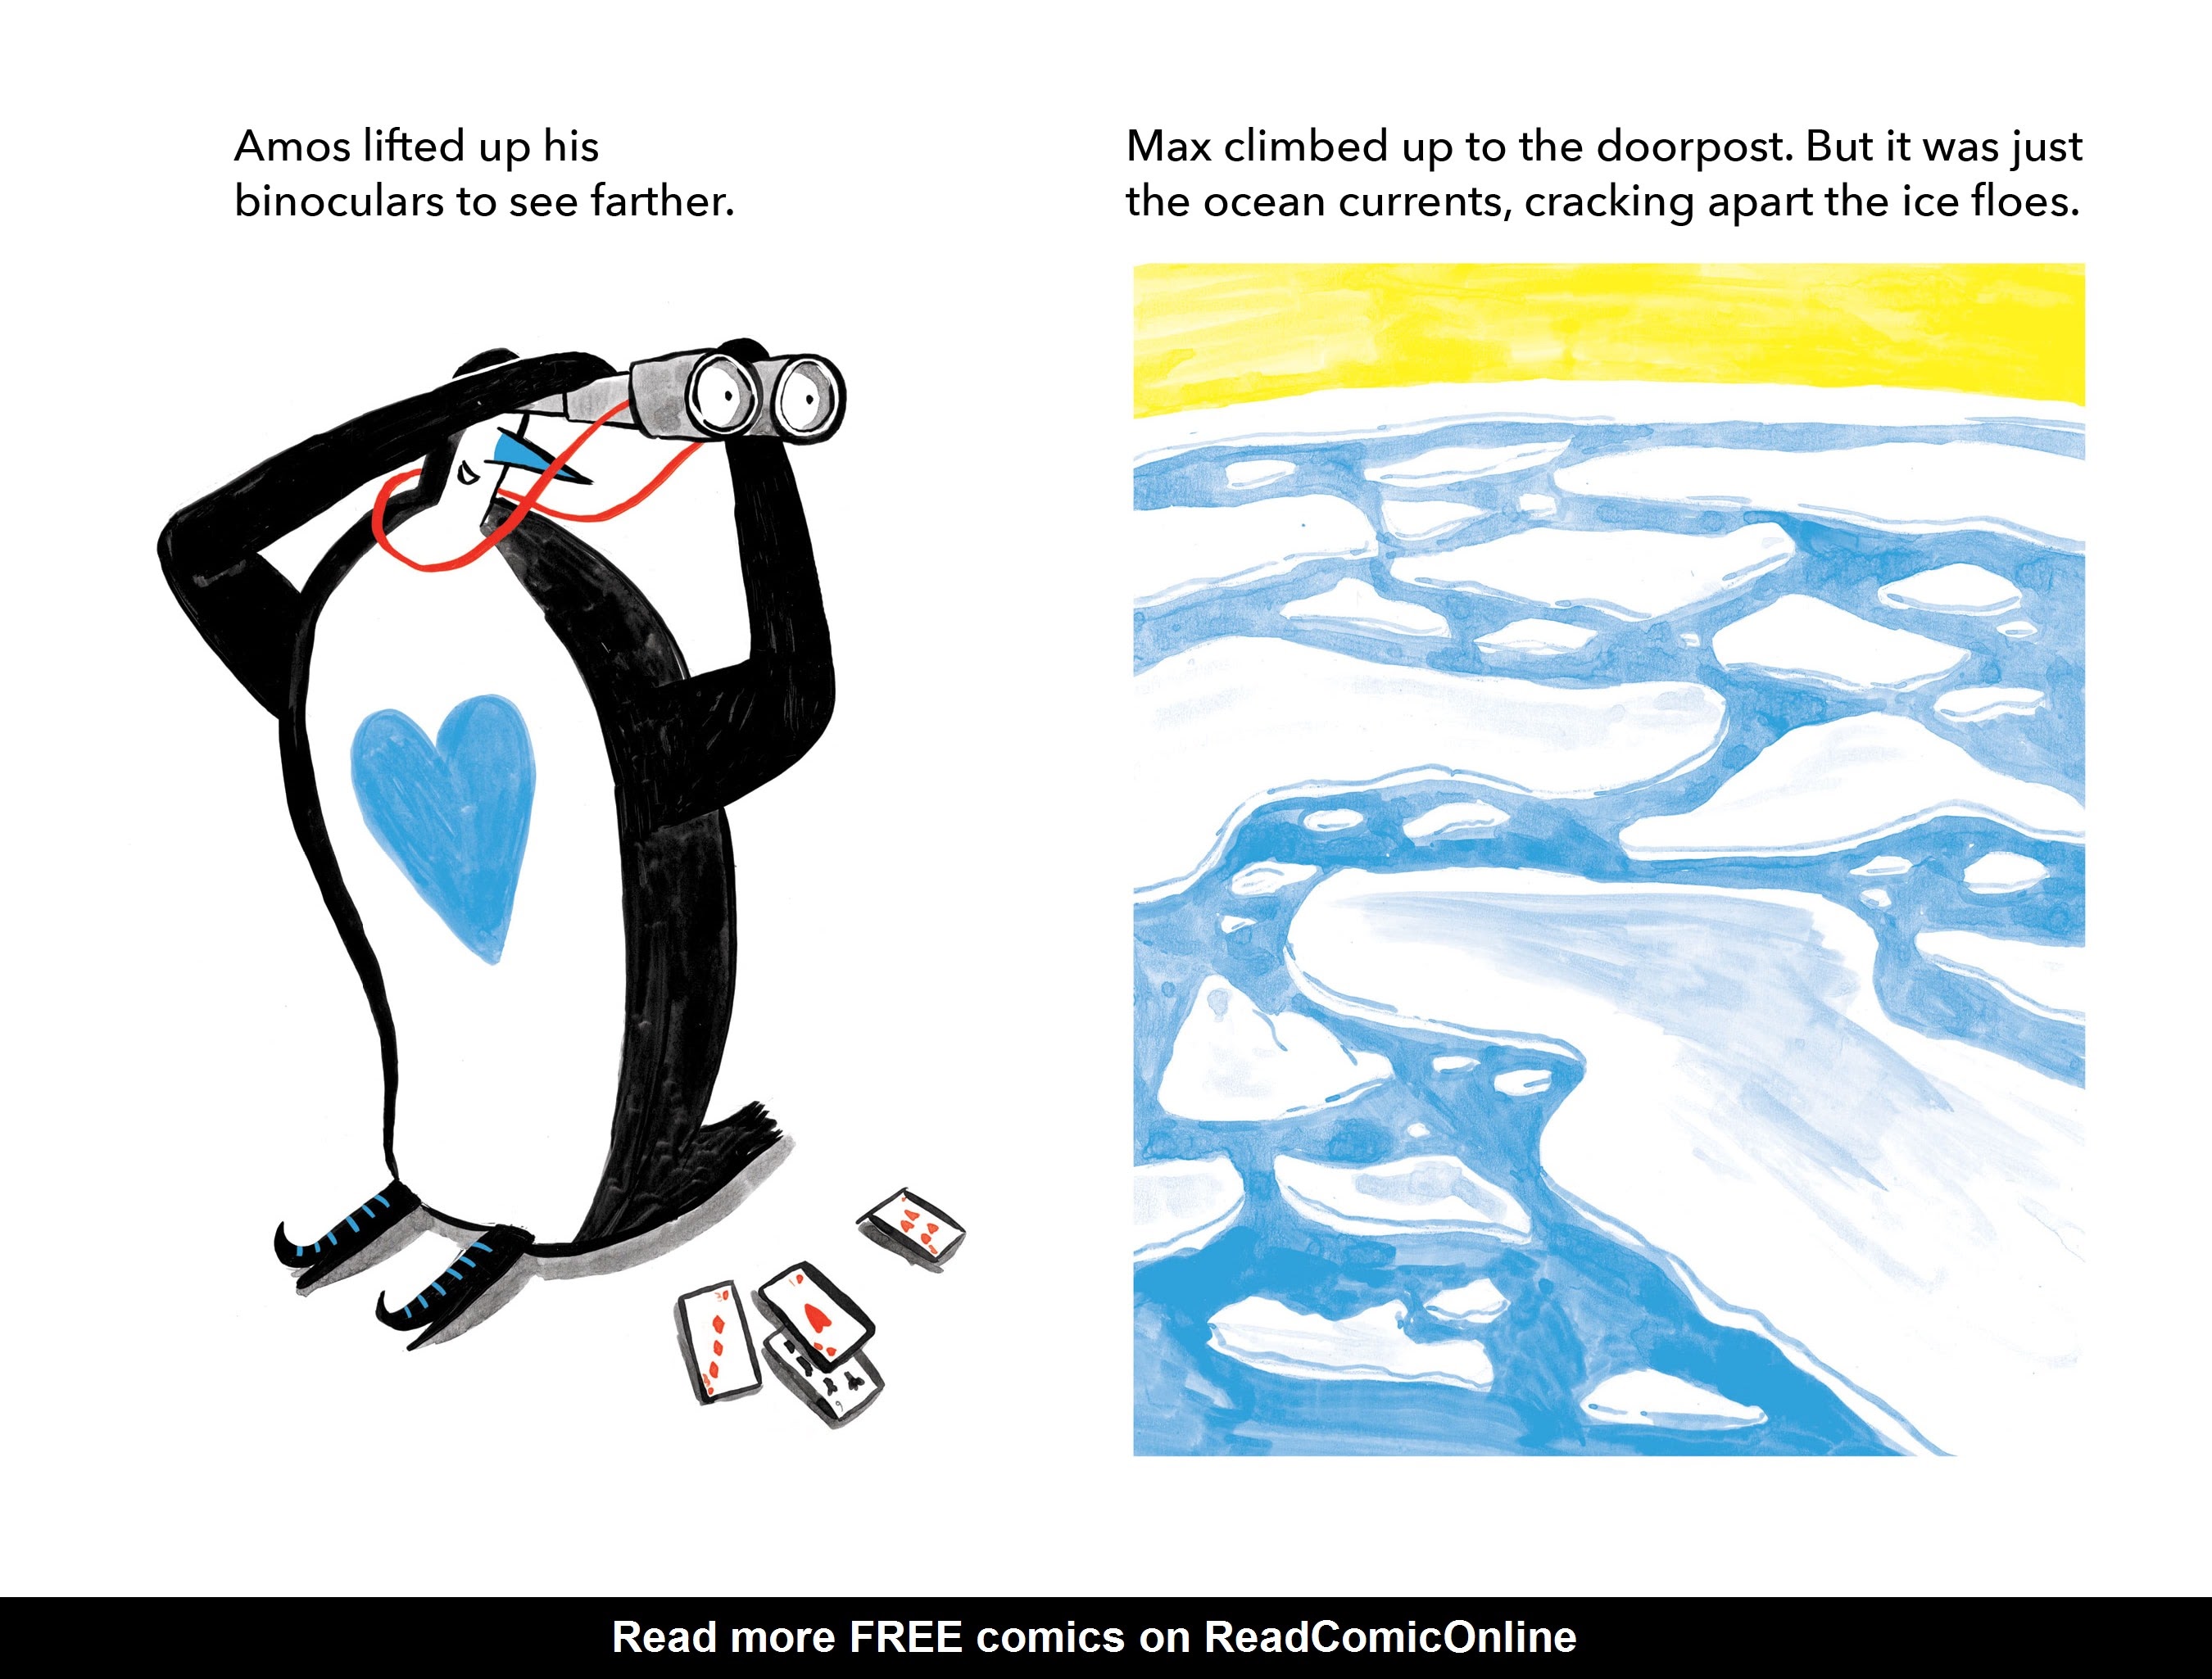 Read online The Penguin Café at the Edge of the World comic -  Issue # Full - 10